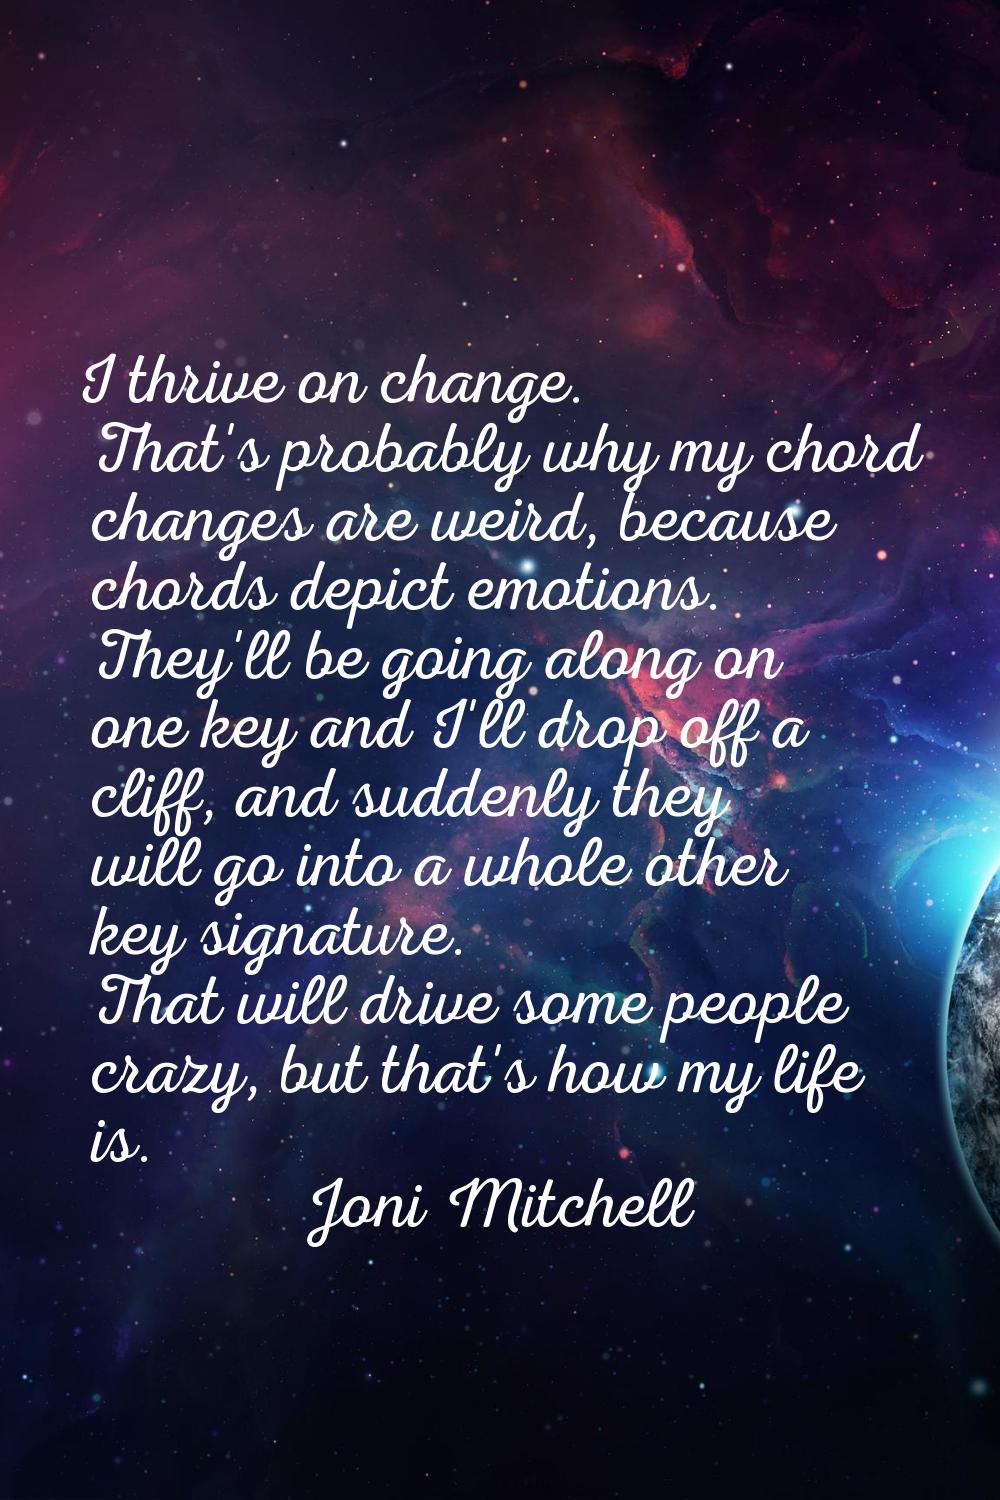 I thrive on change. That's probably why my chord changes are weird, because chords depict emotions.